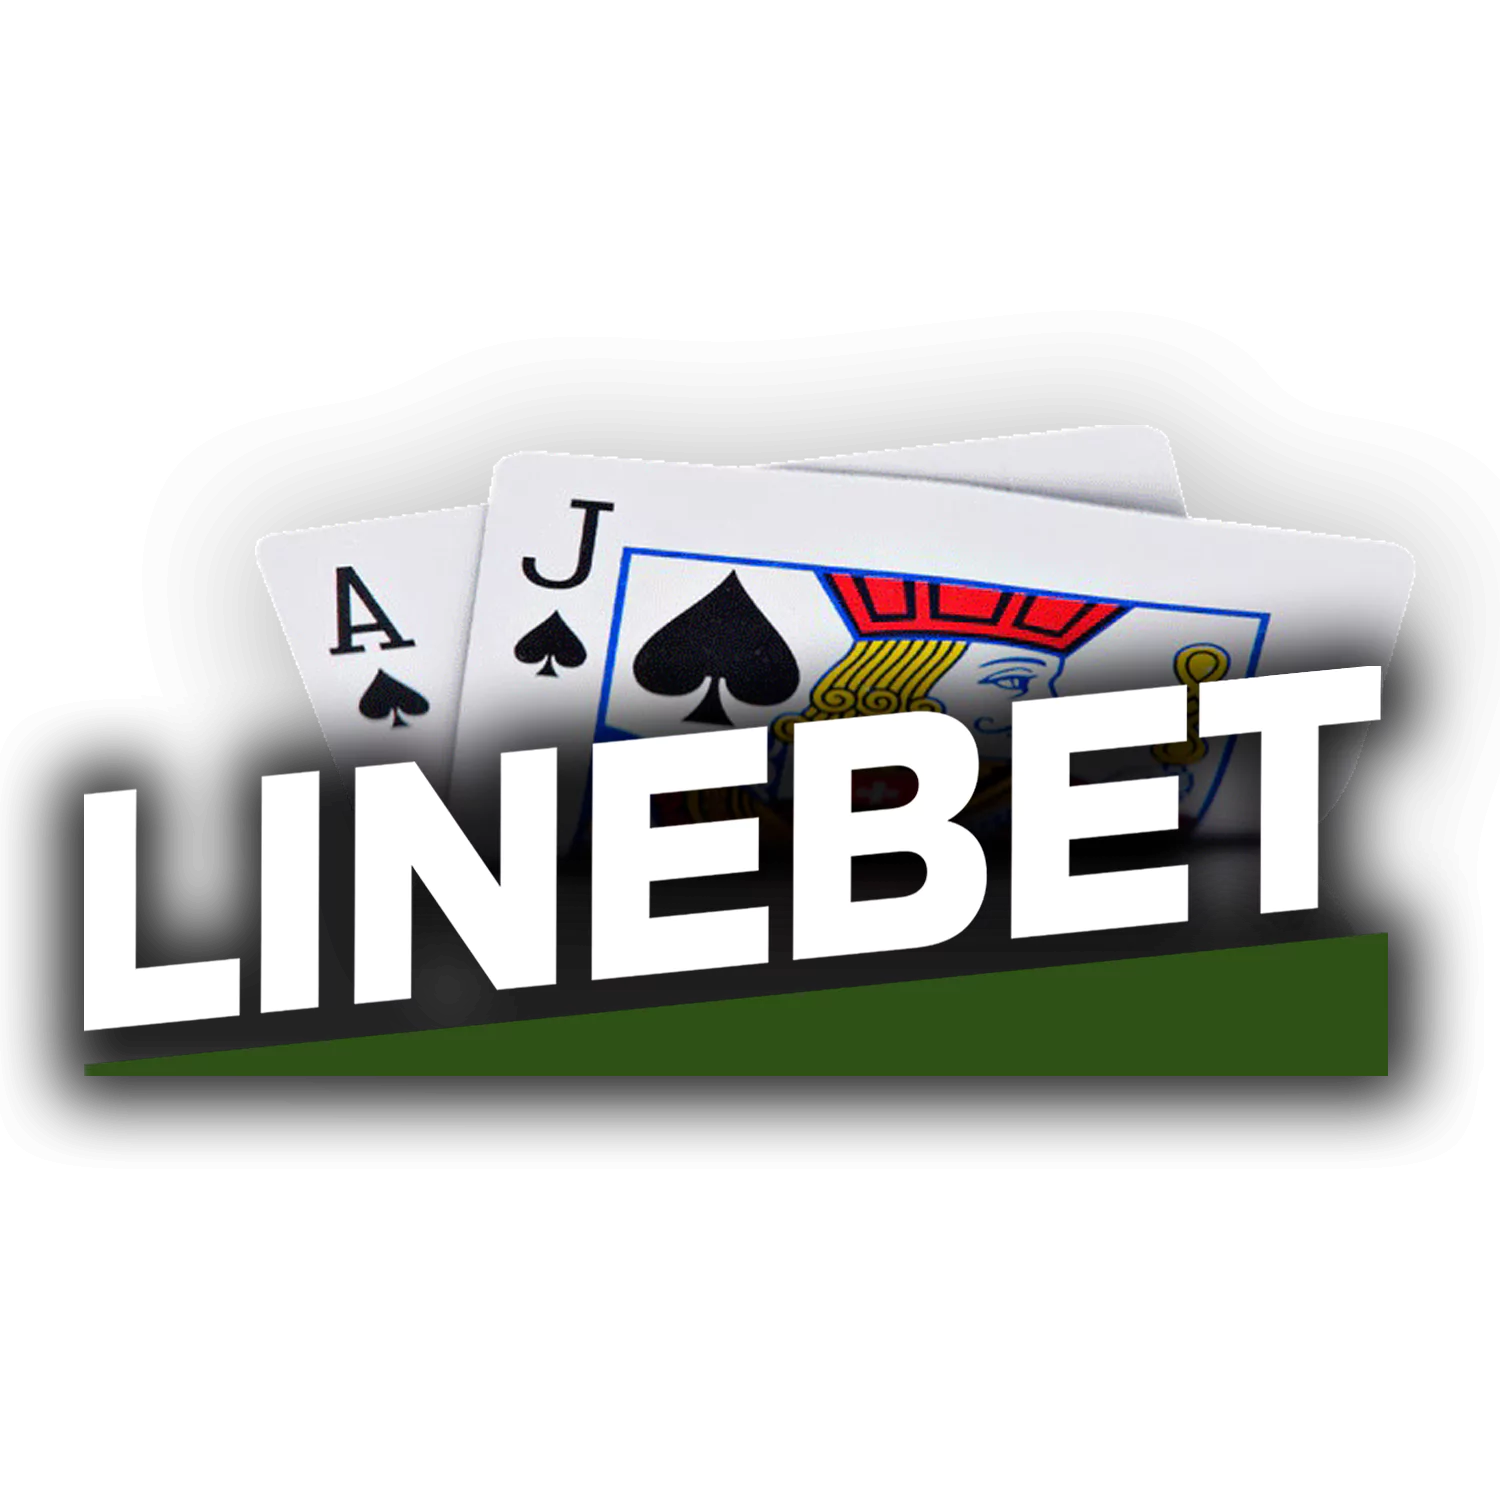 Learn how to play blackjack with a live dealer in the Linebet Casino.